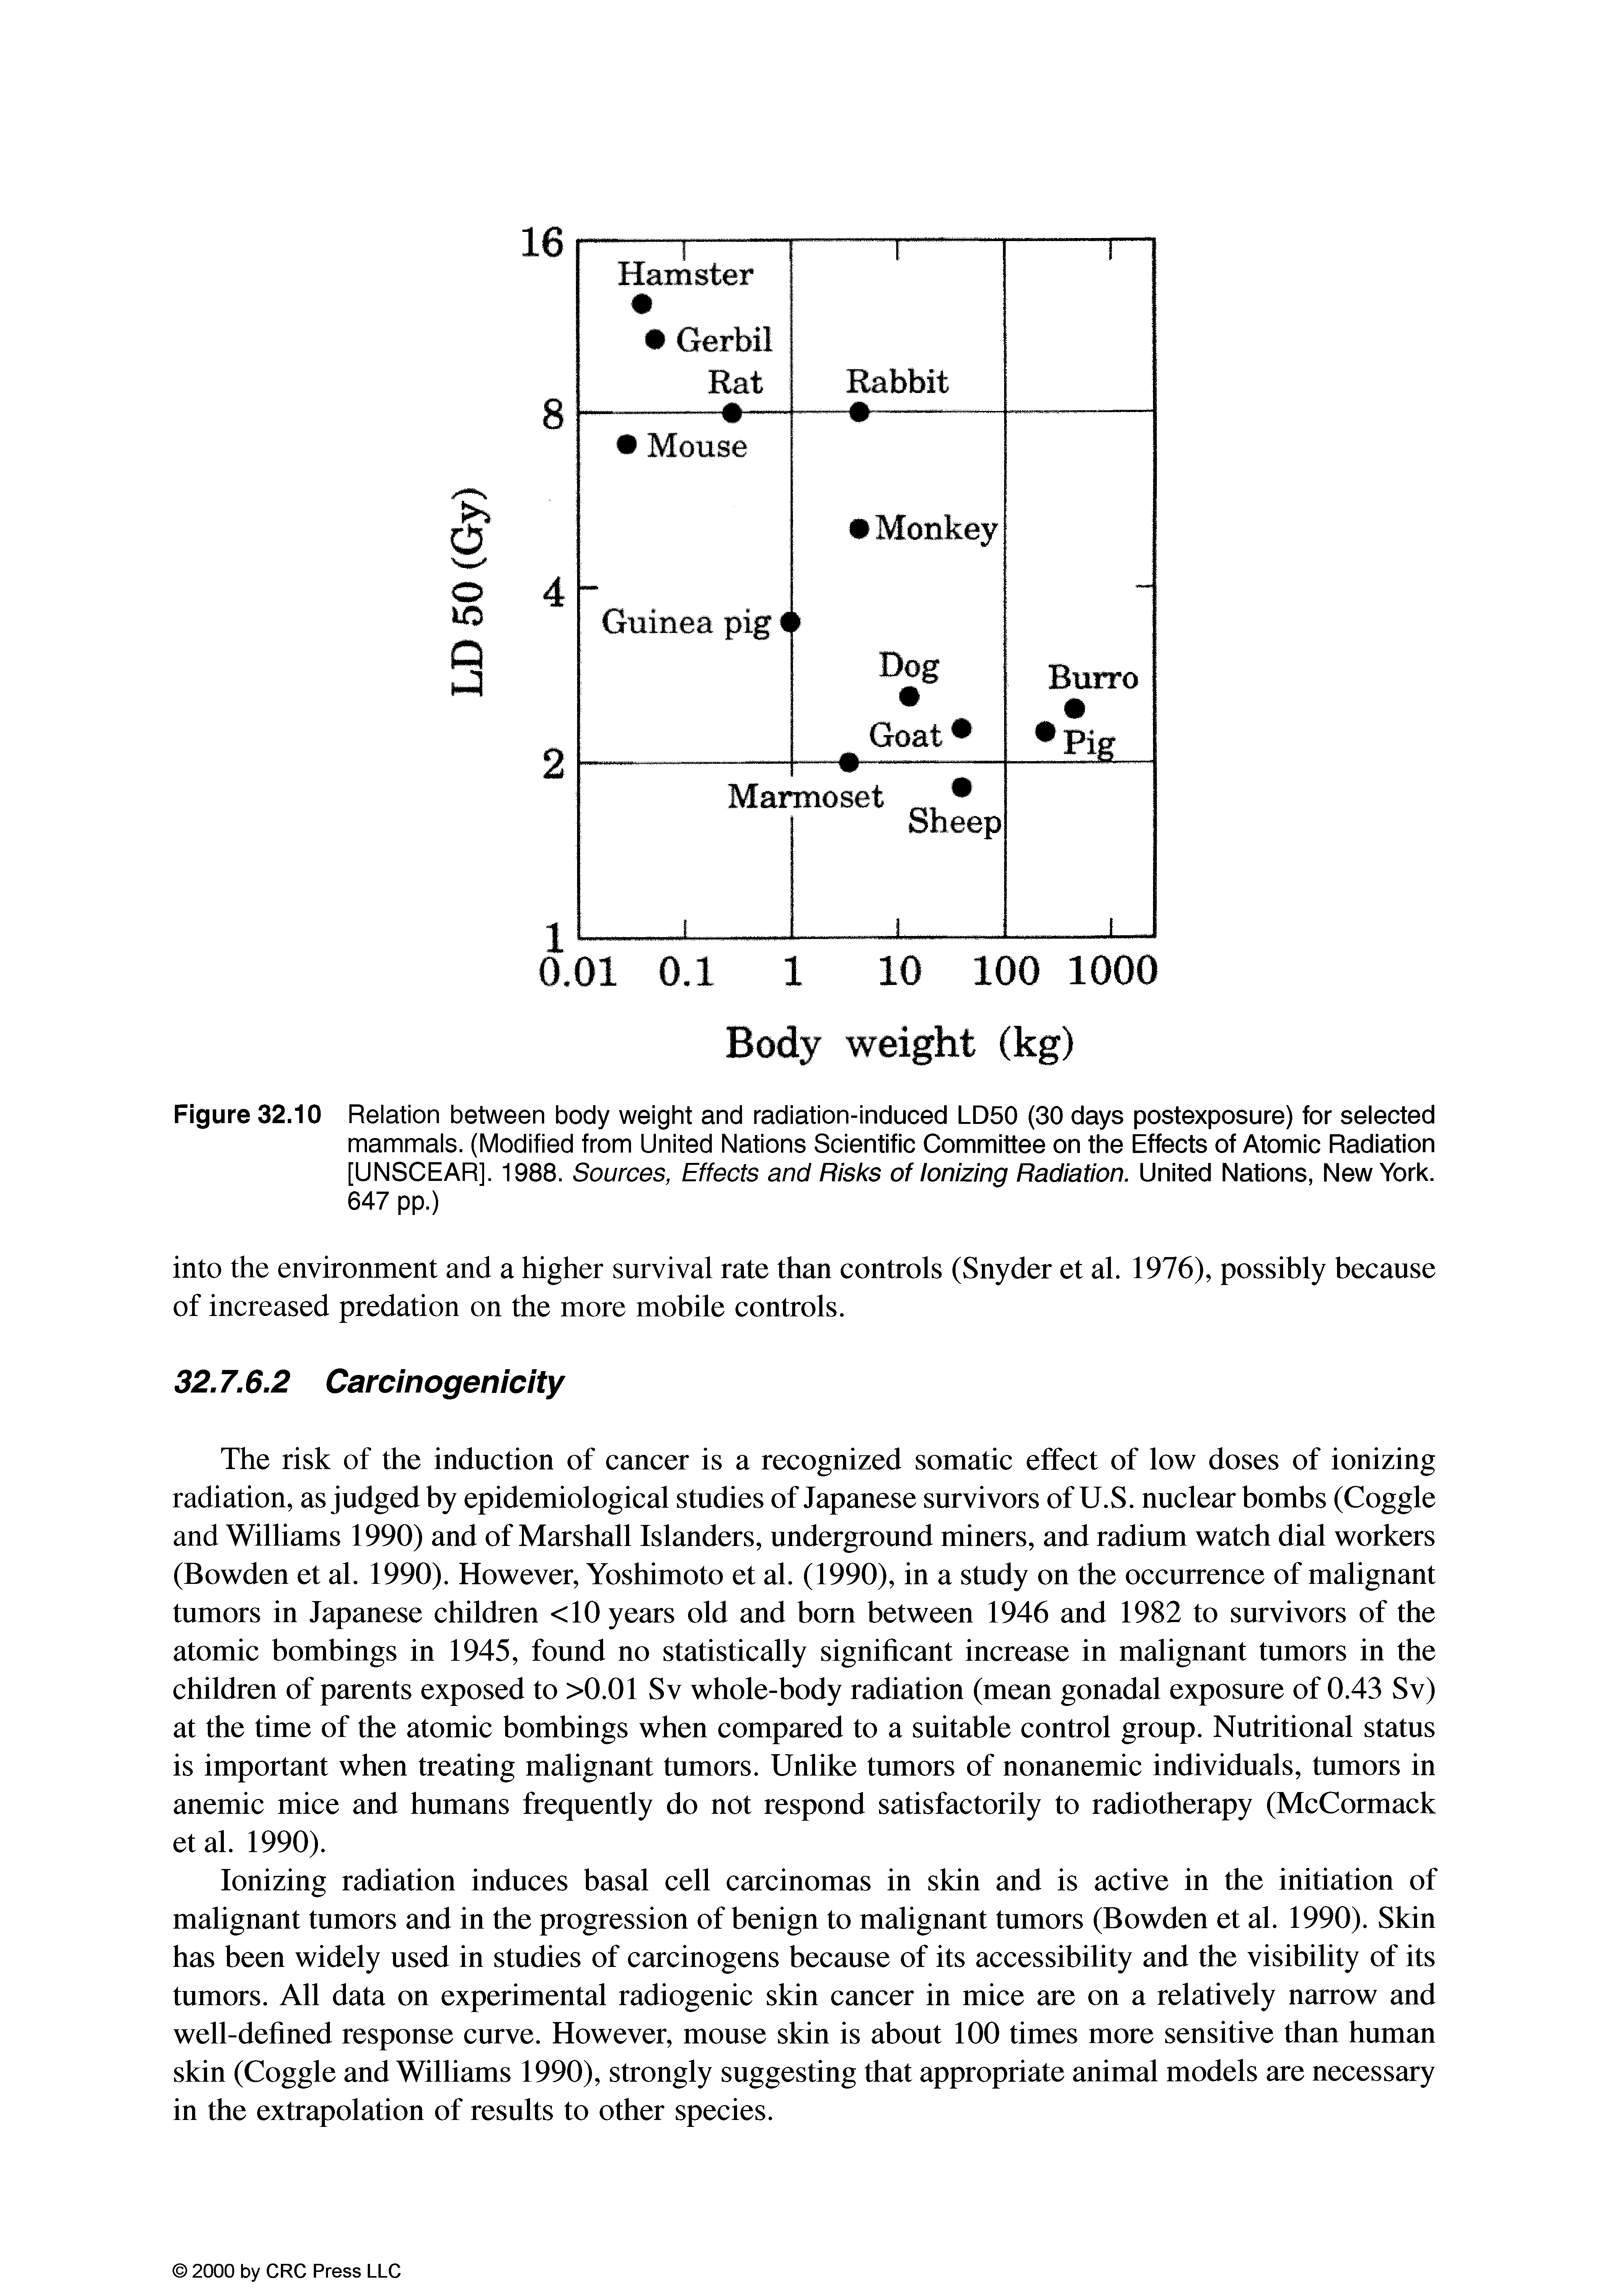 Figure 32.10 Relation between body weight and radiation-induced LD50 (30 days postexposure) for selected mammals. (Modified from United Nations Scientific Committee on the Effects of Atomic Radiation [UNSCEAR]. 1988. Sources, Effects and Risks of Ionizing Radiation. United Nations, New York. 647 pp.)...